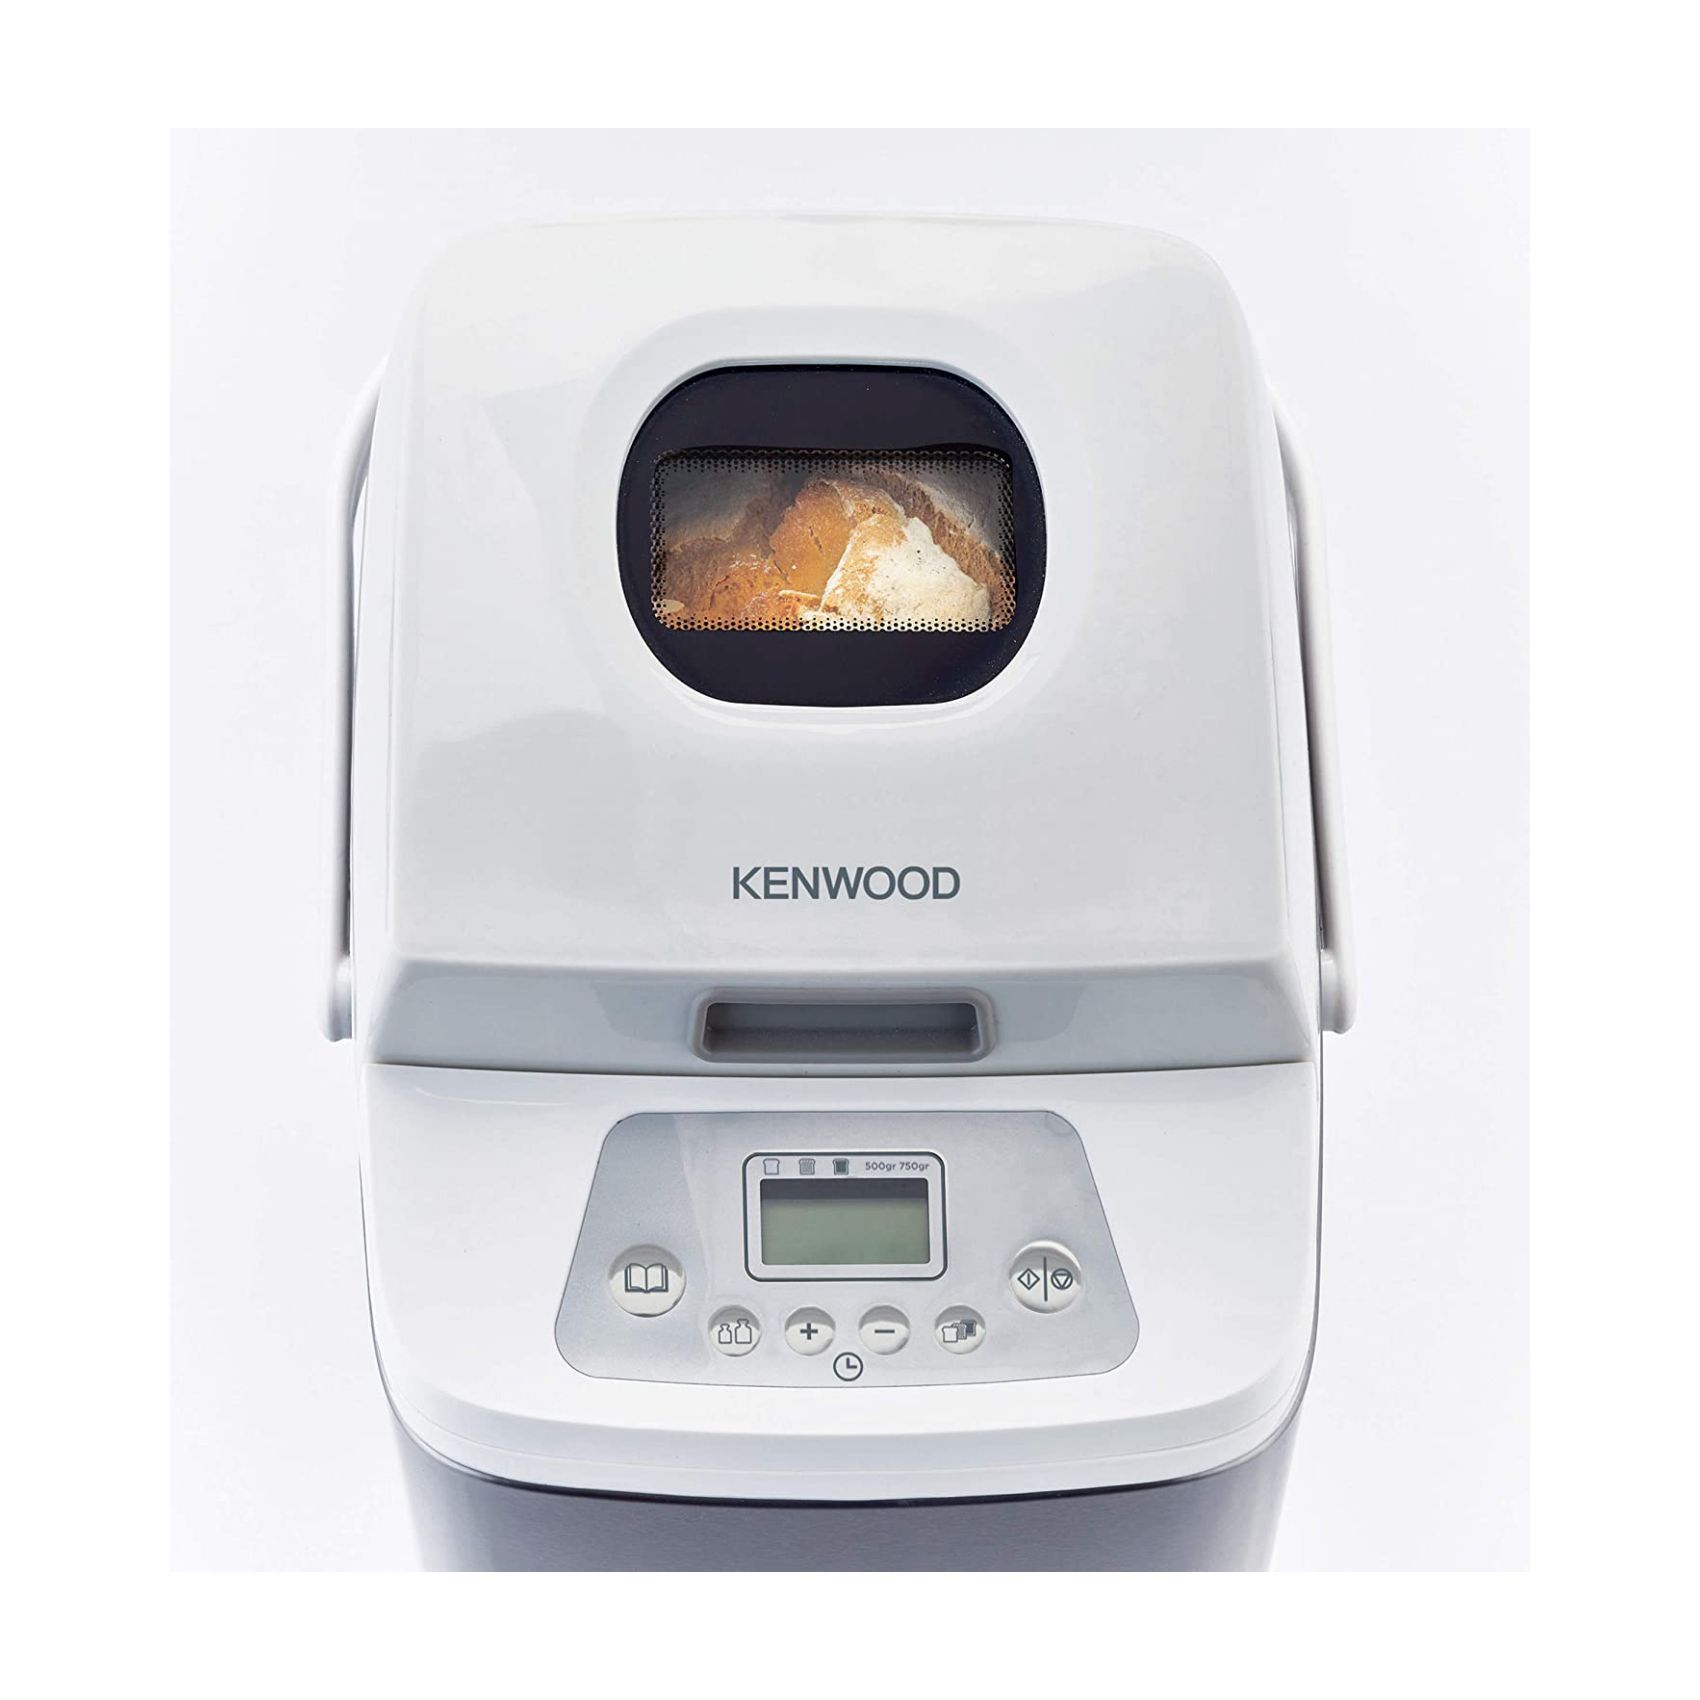 Kenwood 19-in-1 Multifunctional Automatic Bread Maker BMM13.000WH